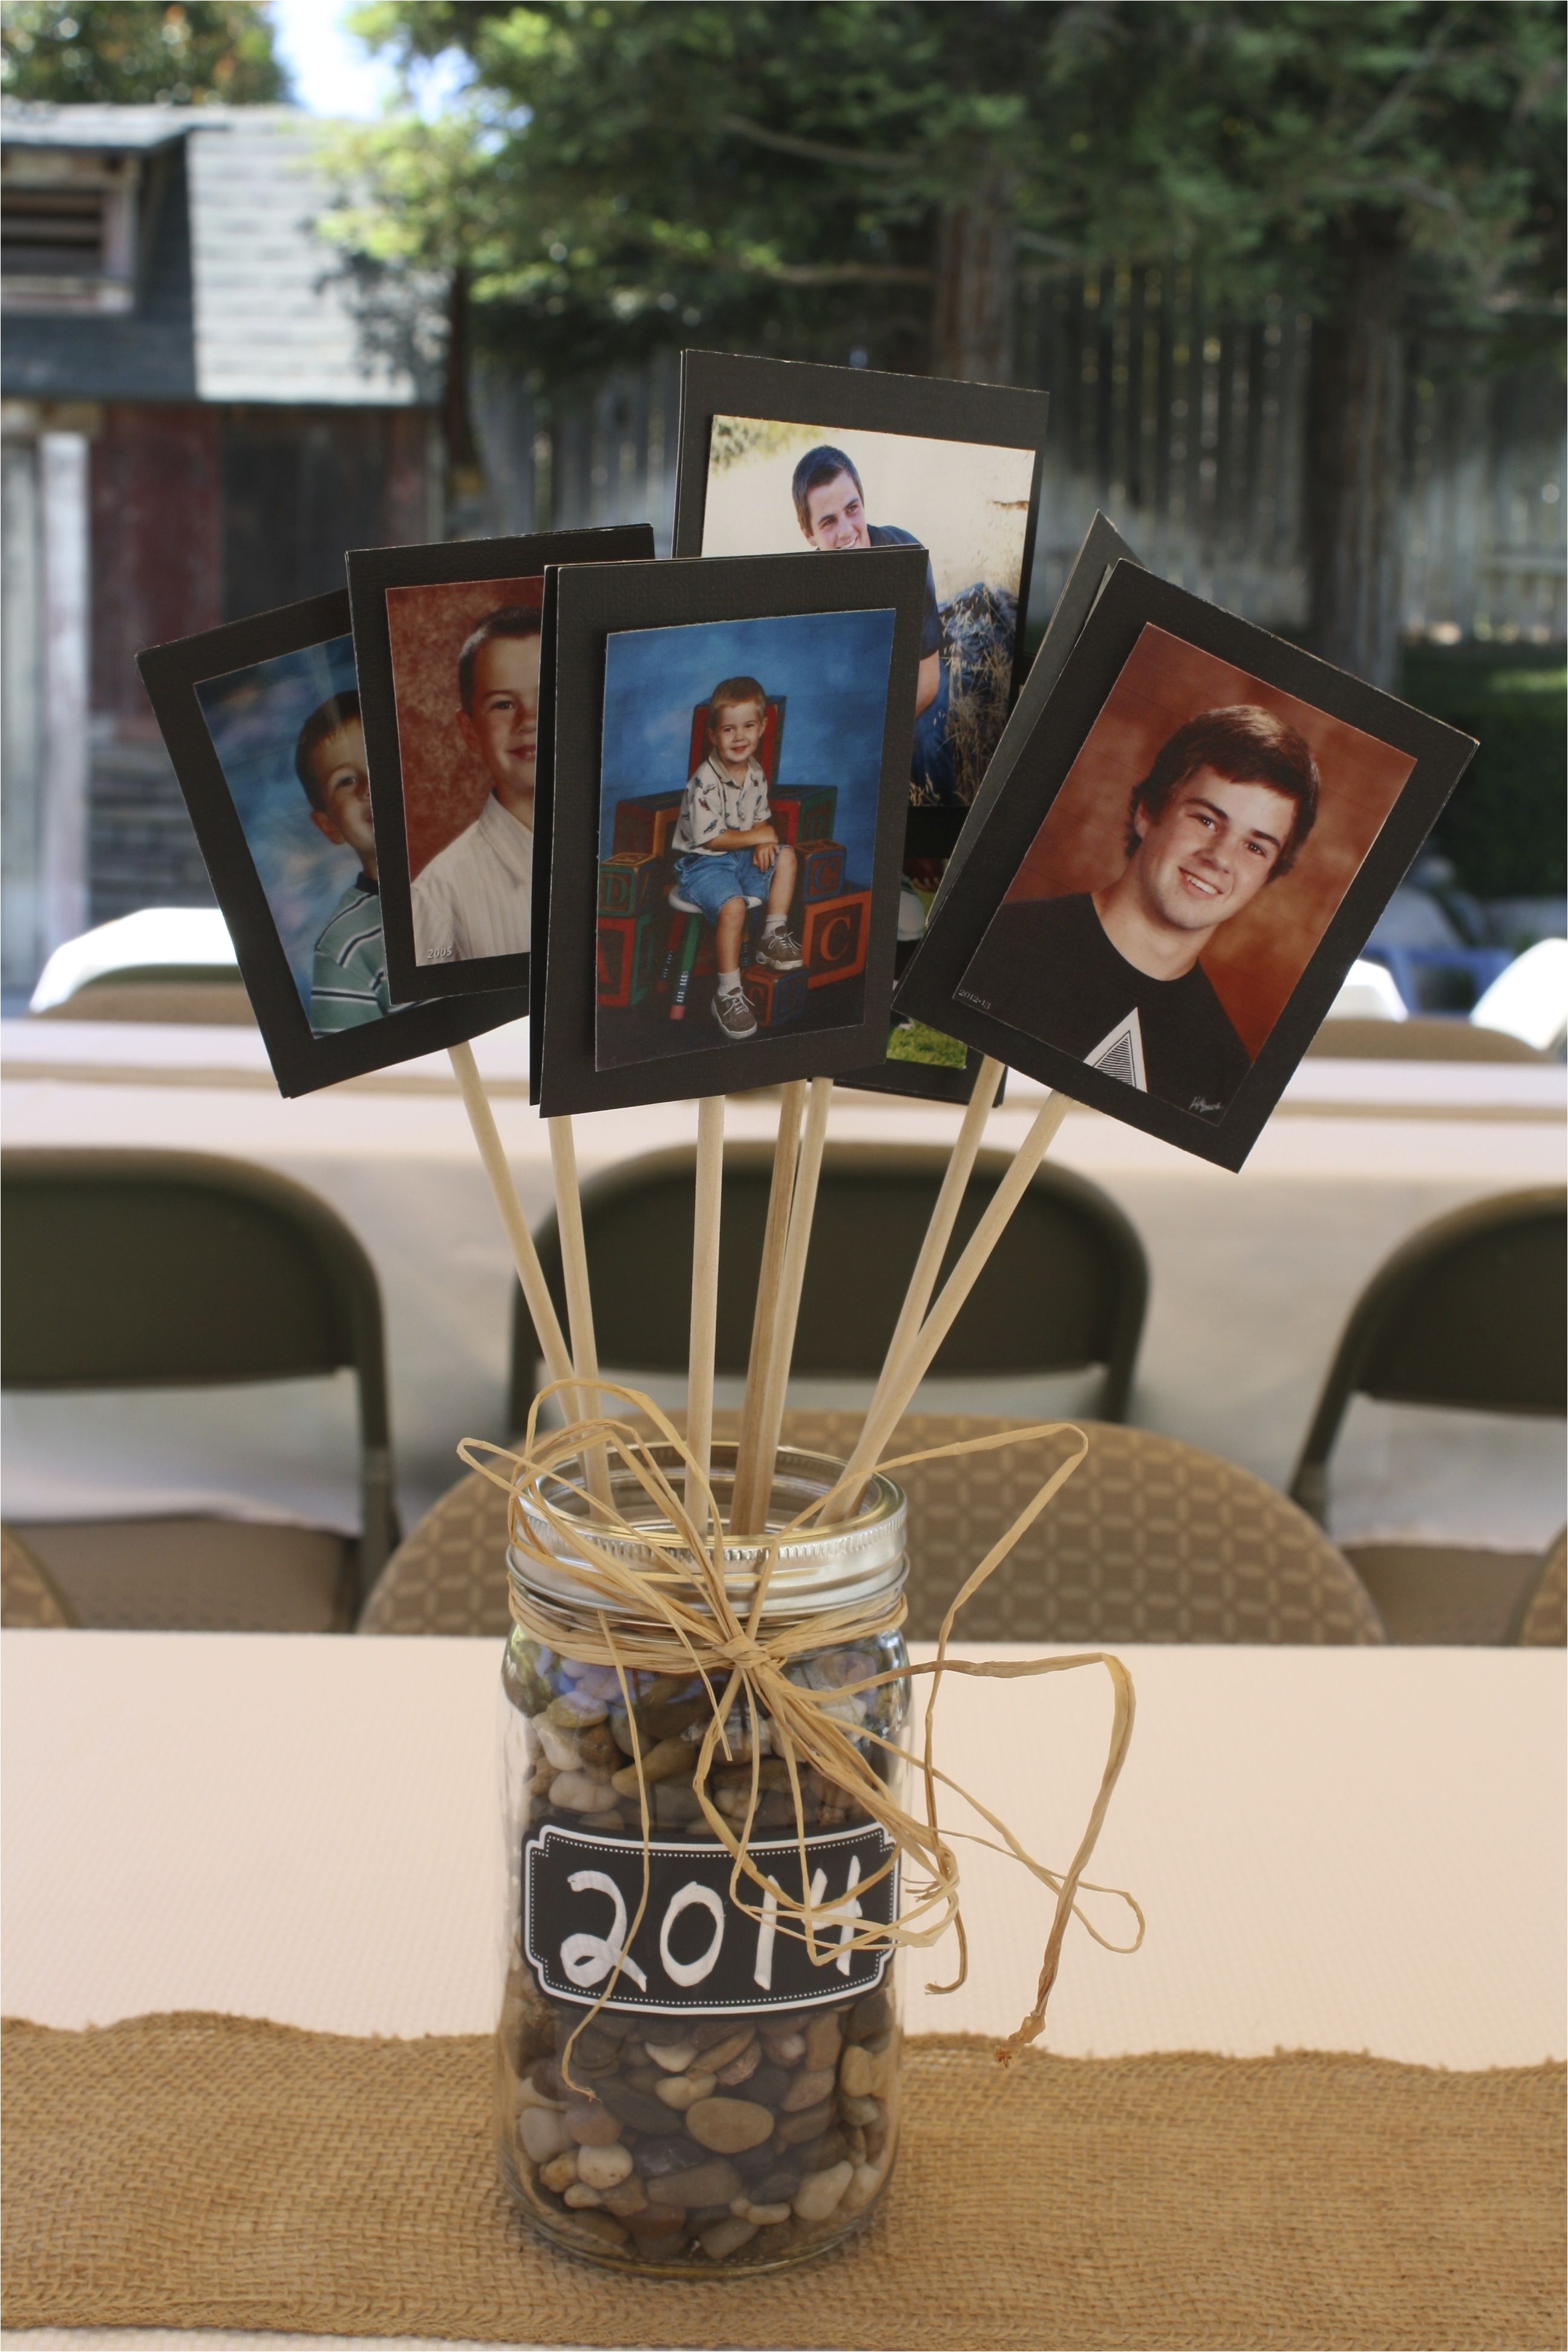 centerpiece for tables at a graduation party good for guysno flowers each picture is a school picture showcasing the grad in different grades